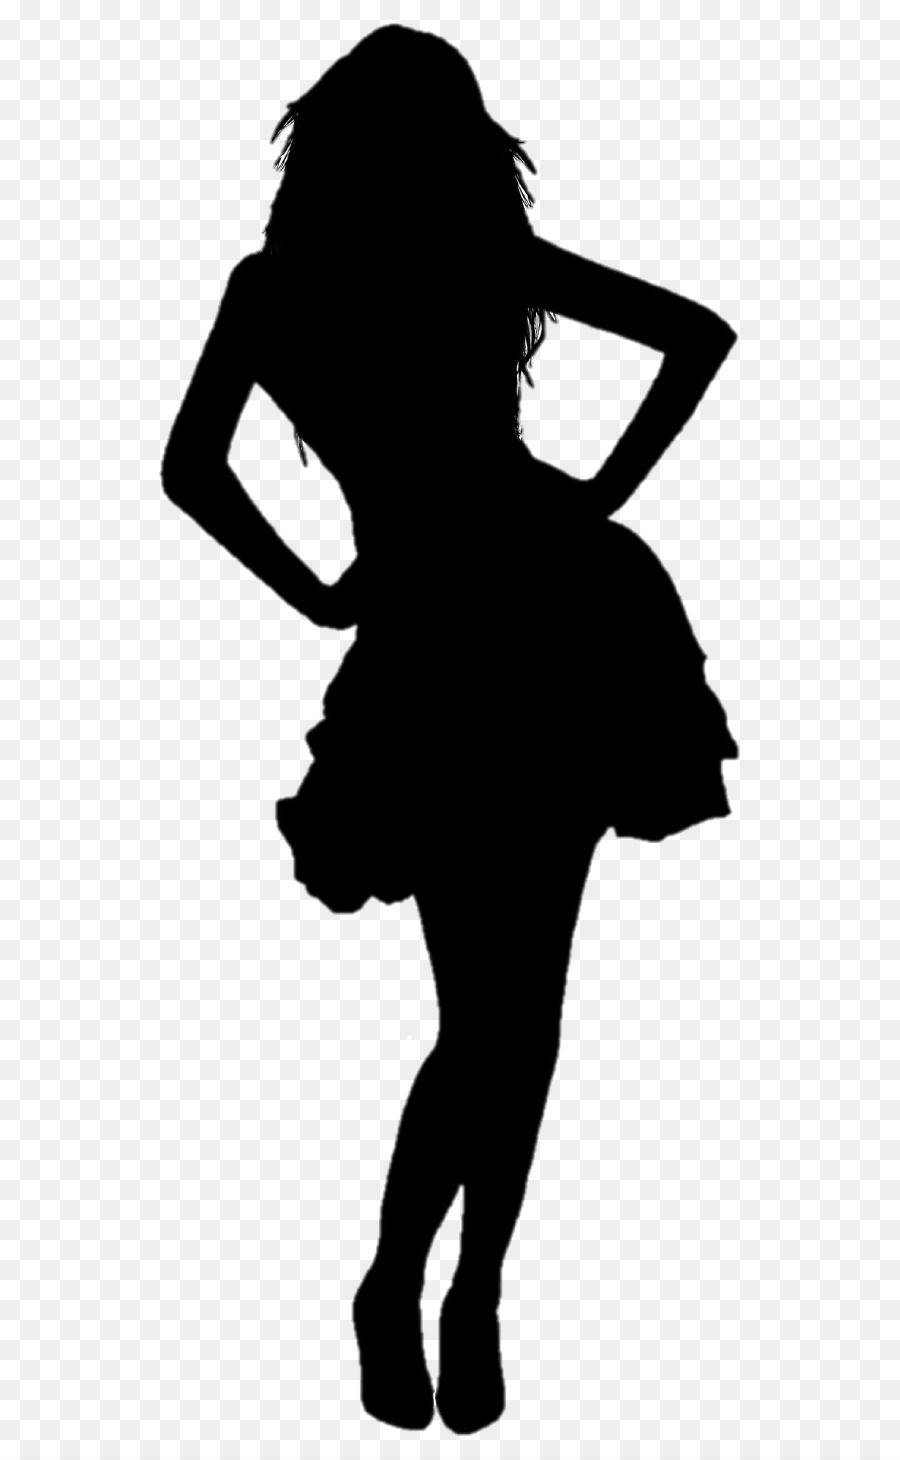 Silhouette Woman Photography Clip art - invisible woman png download - 834*1459 - Free Transparent Silhouette png Download.